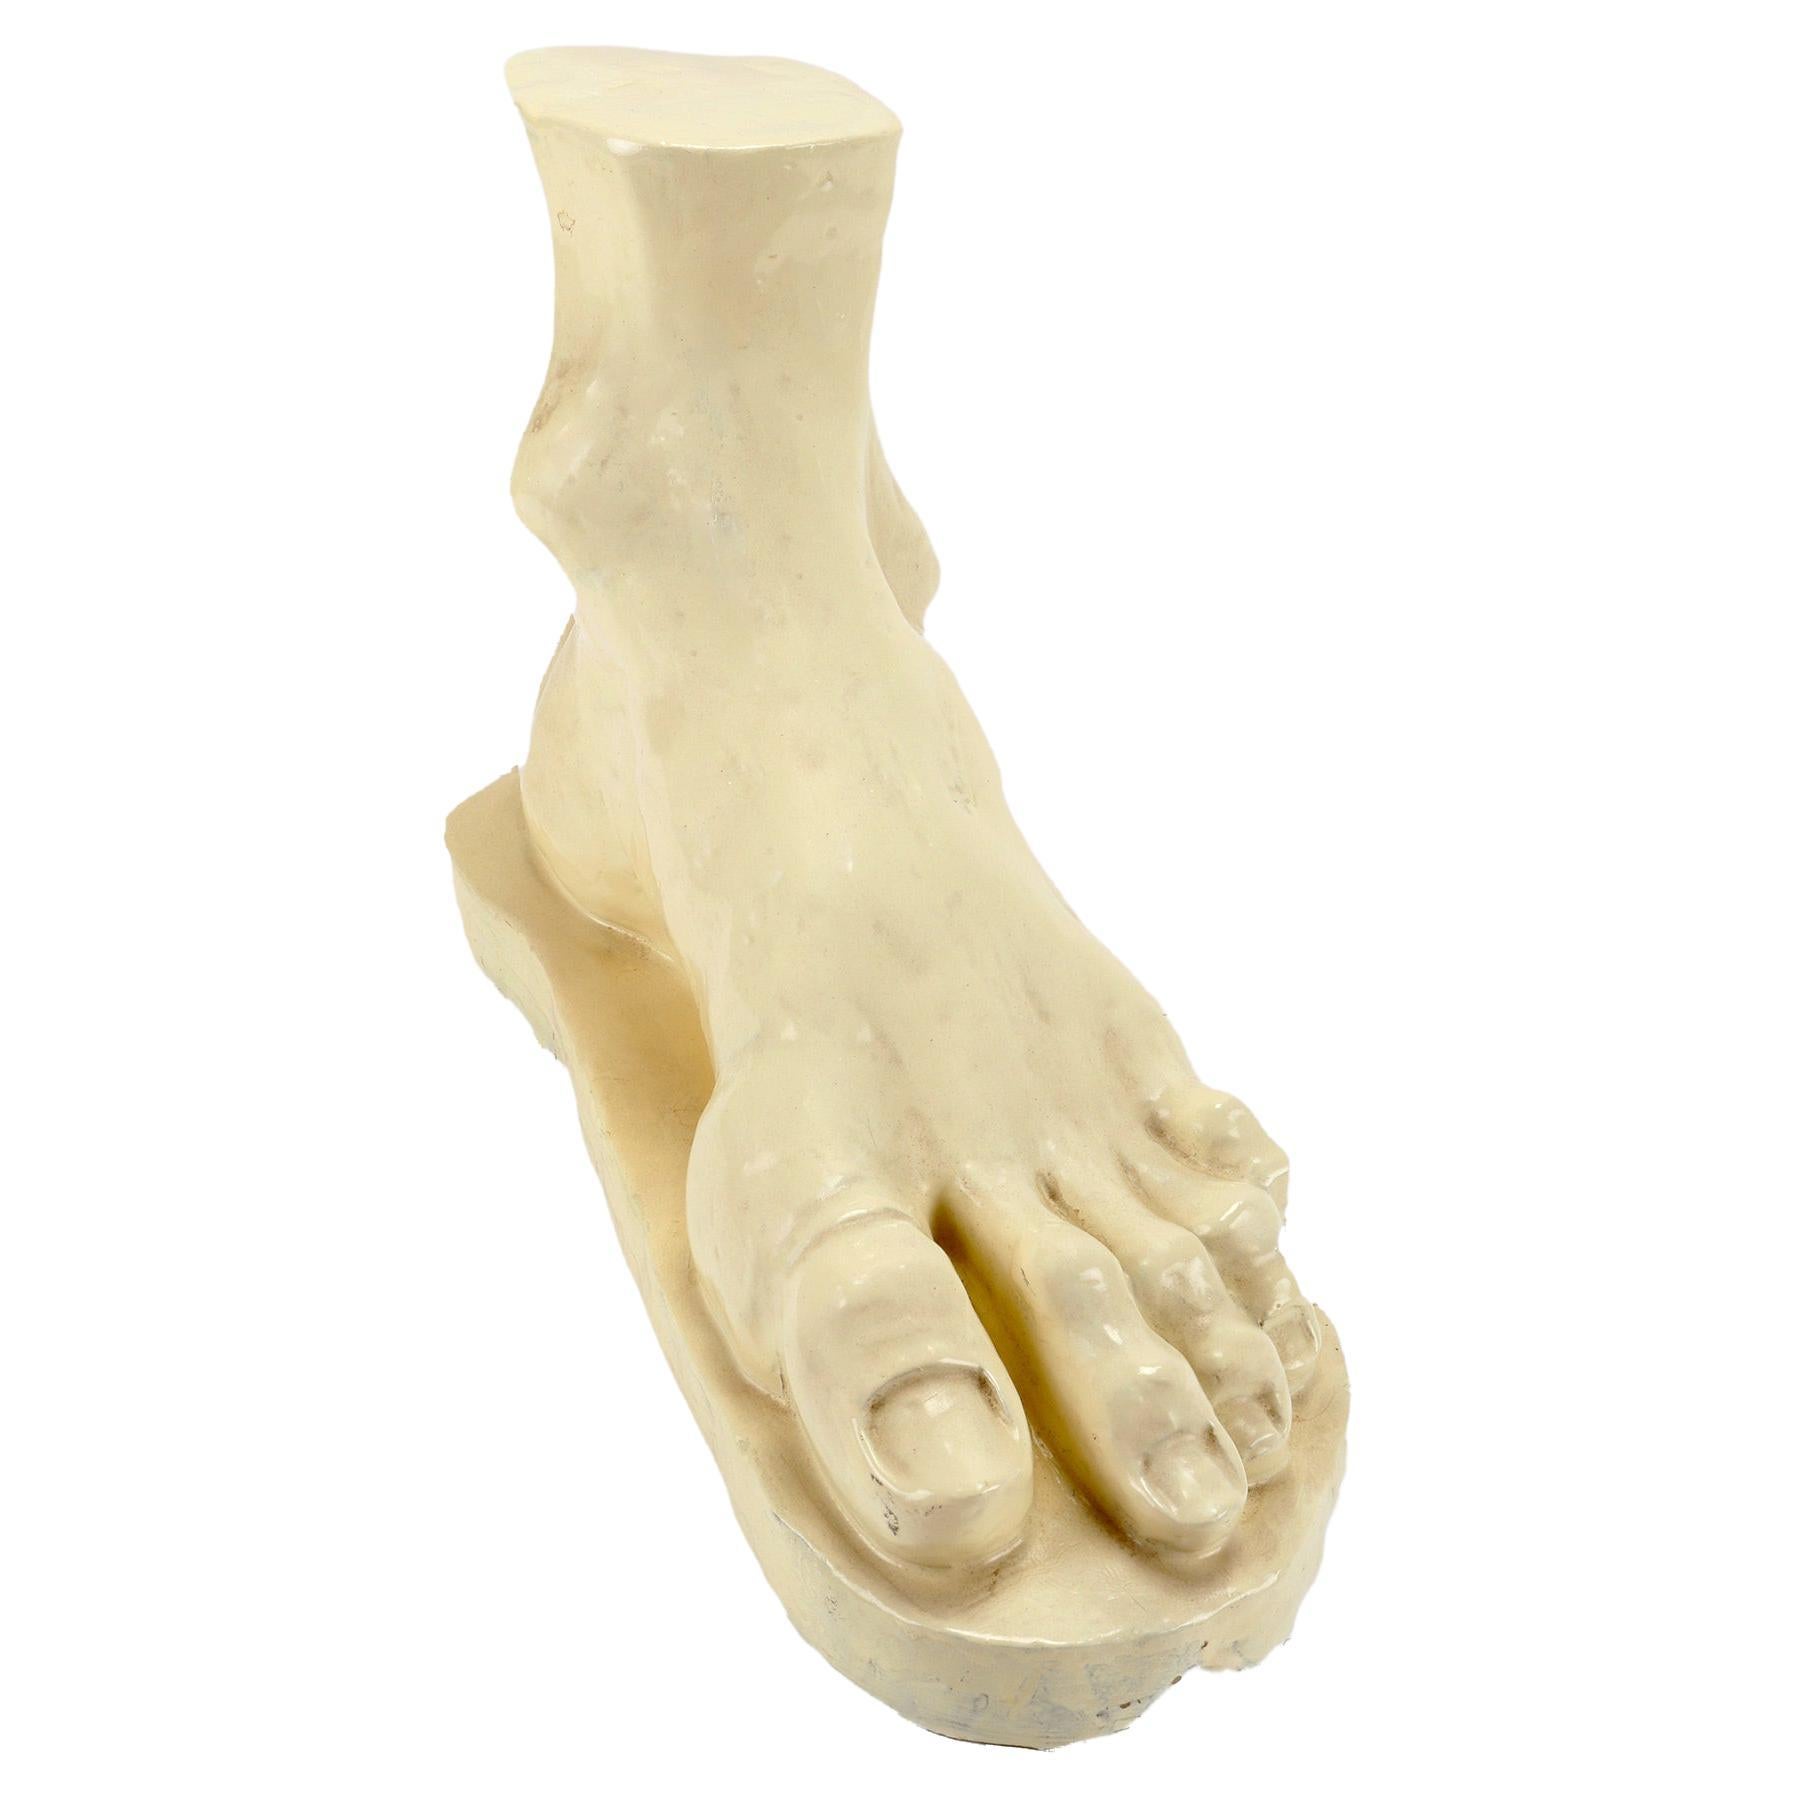 Glazed Clay Sculpture Depicting a Foot, Italy, 1900 For Sale